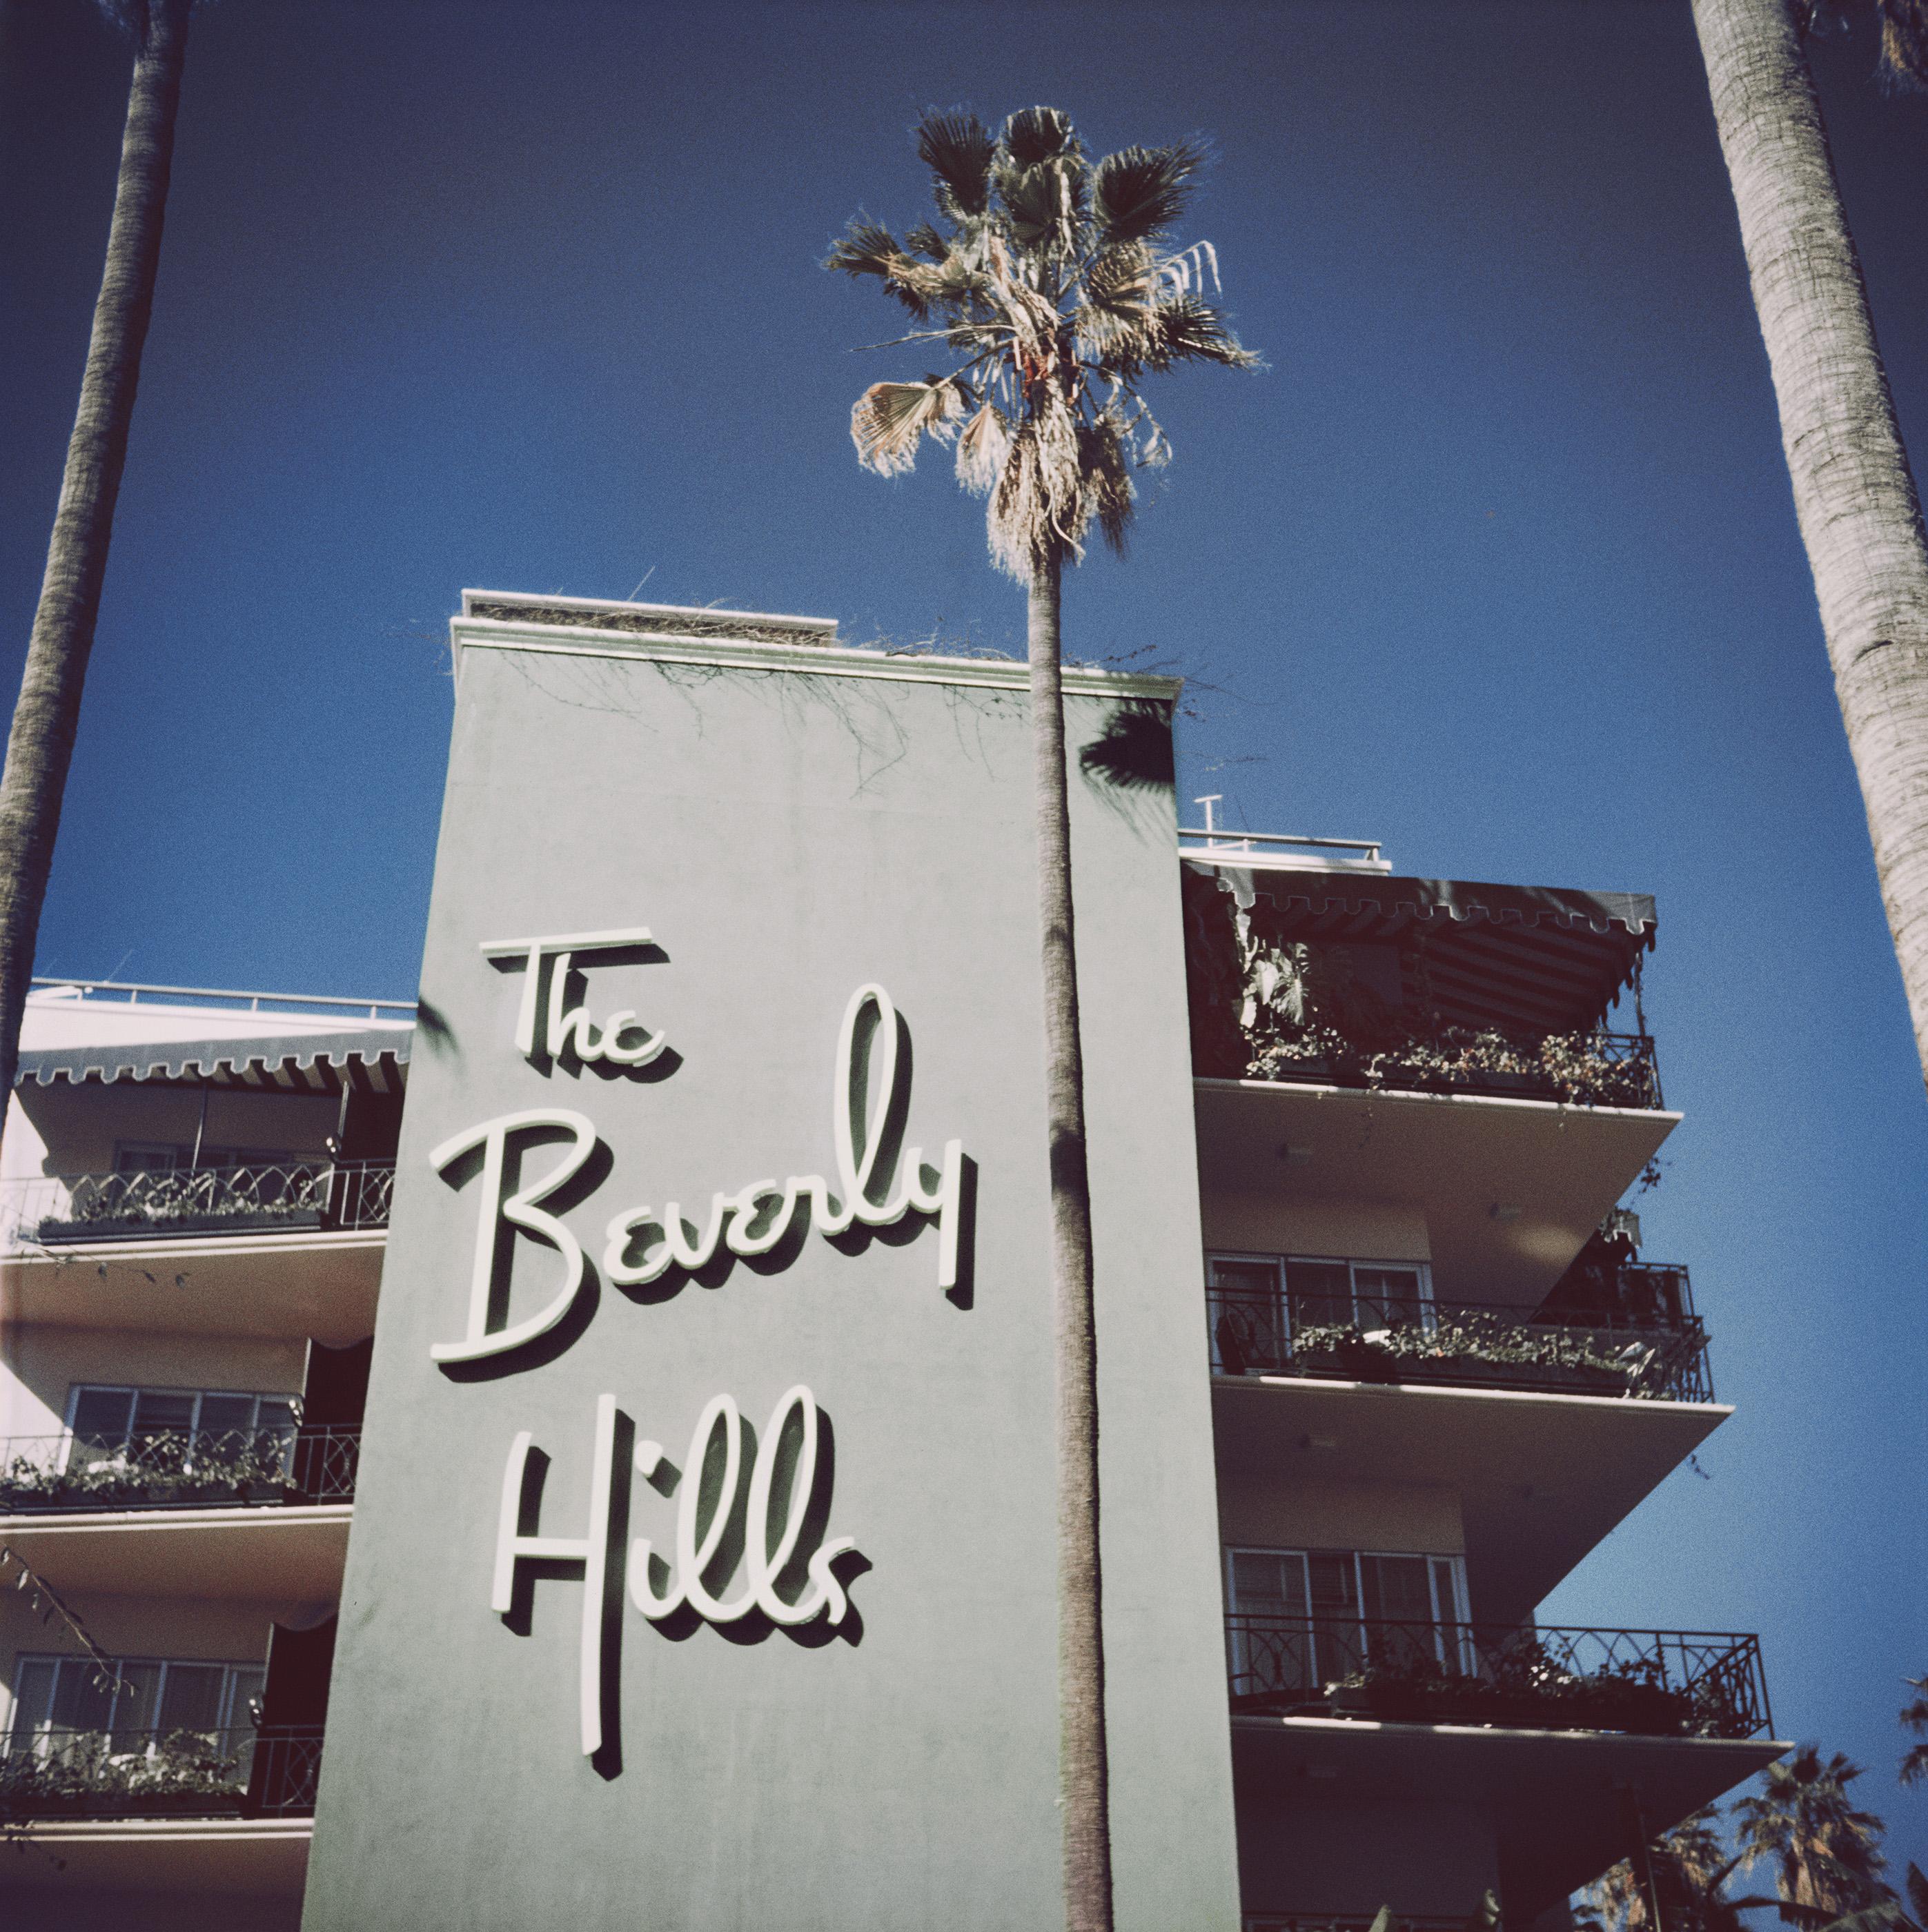 Slim Aarons Landscape Photograph - The Beverly Hills Hotel Sign (Aarons Estate Edition)